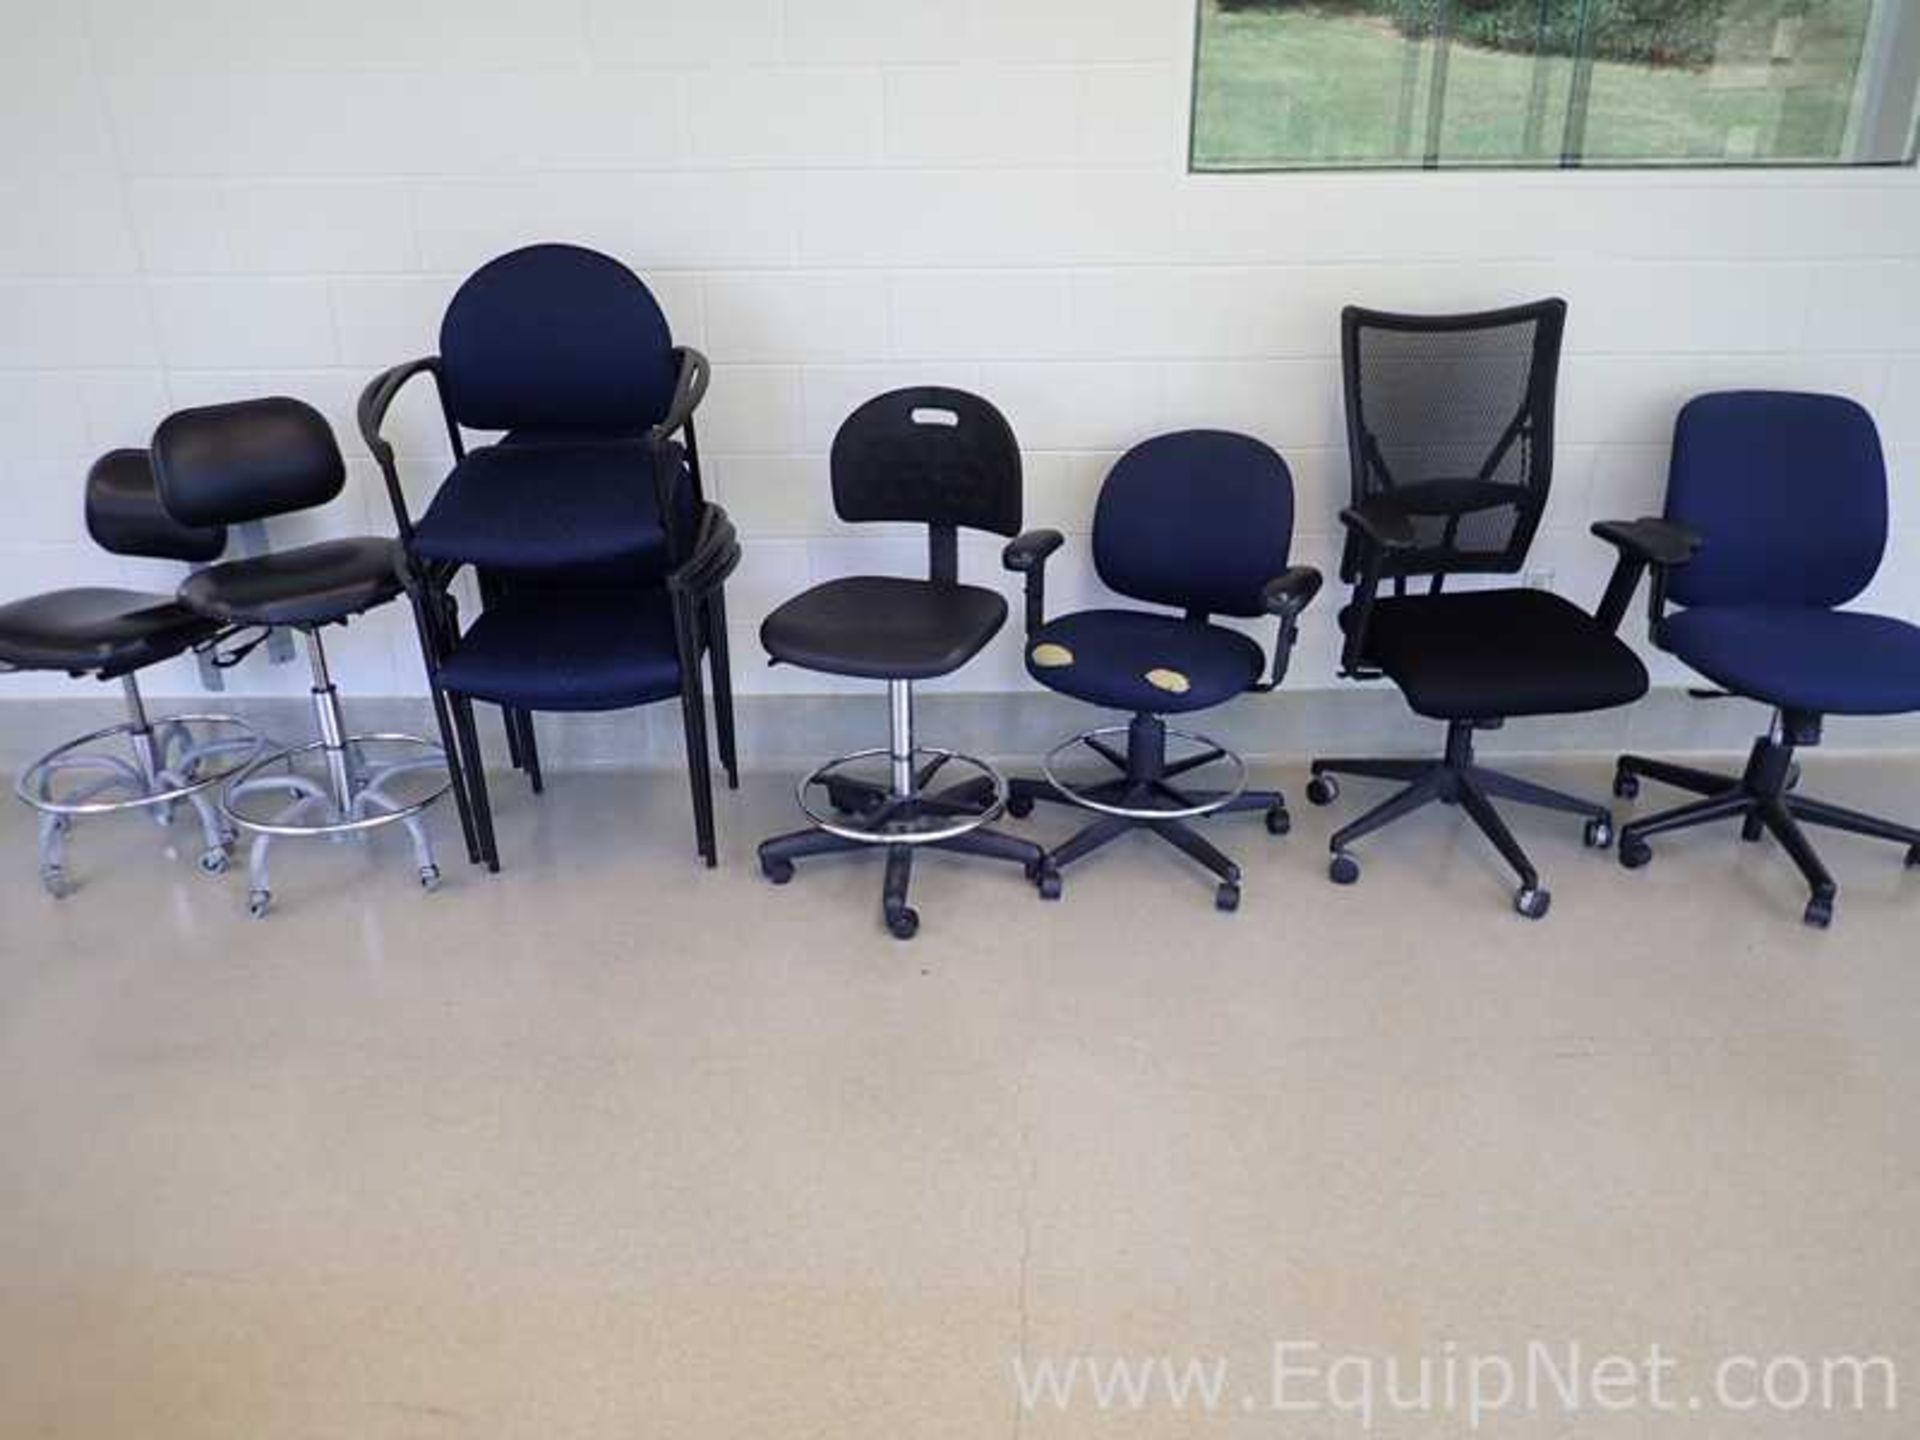 Lot of 9 Chairs